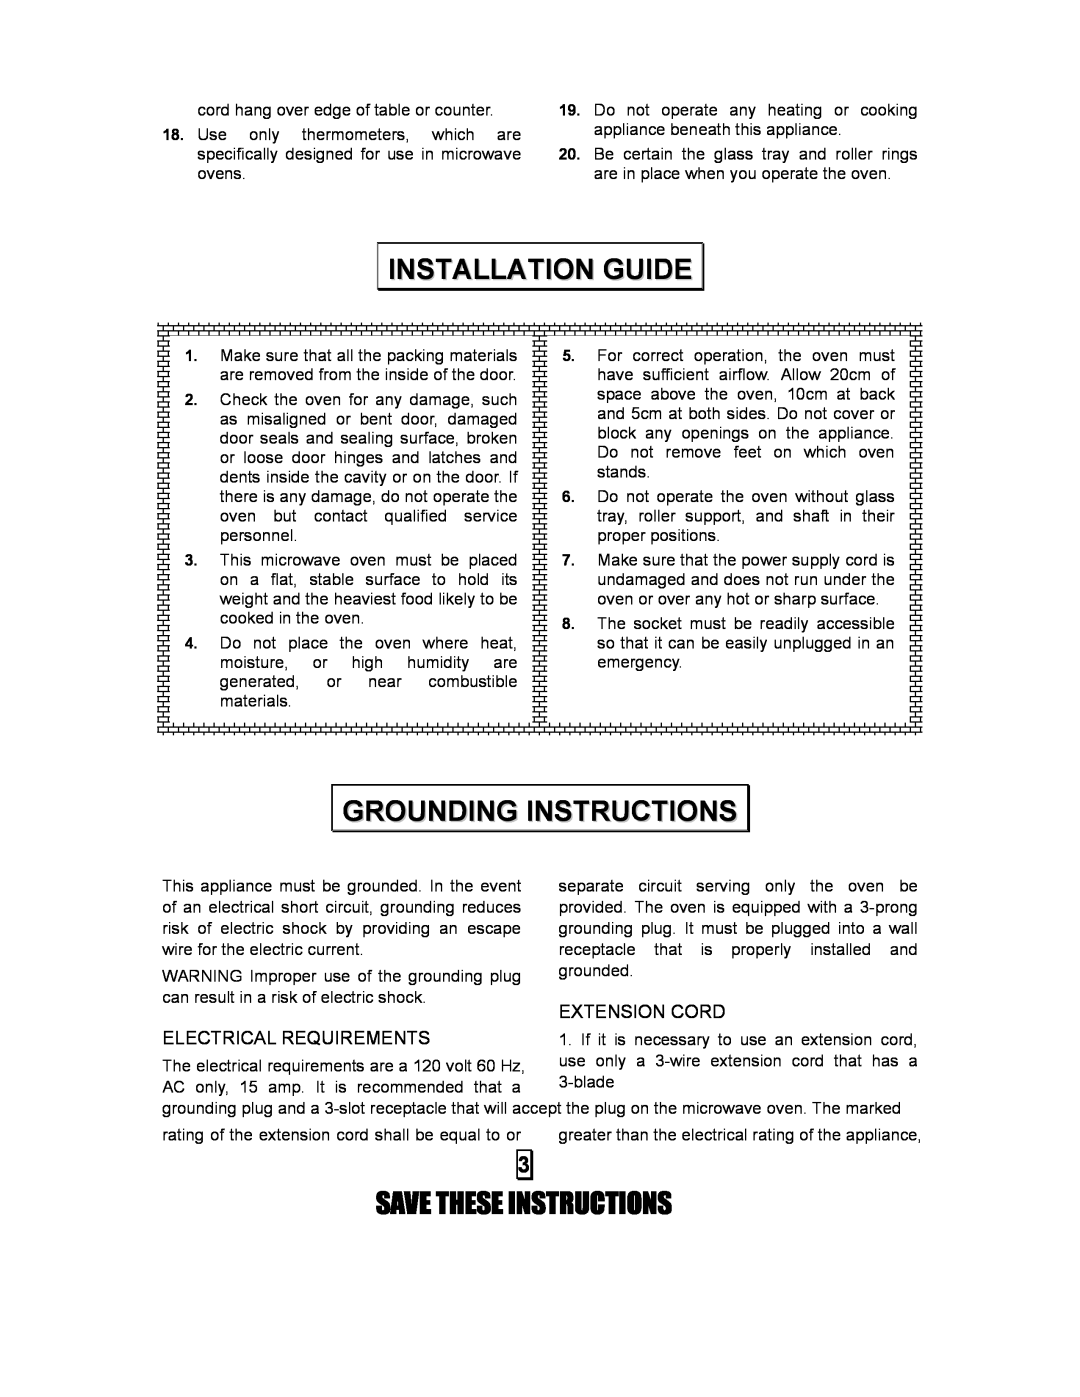 Kenmore 87103 user manual Installation Guide, Grounding Instructions, Electrical Requirements, Save These Instructions 